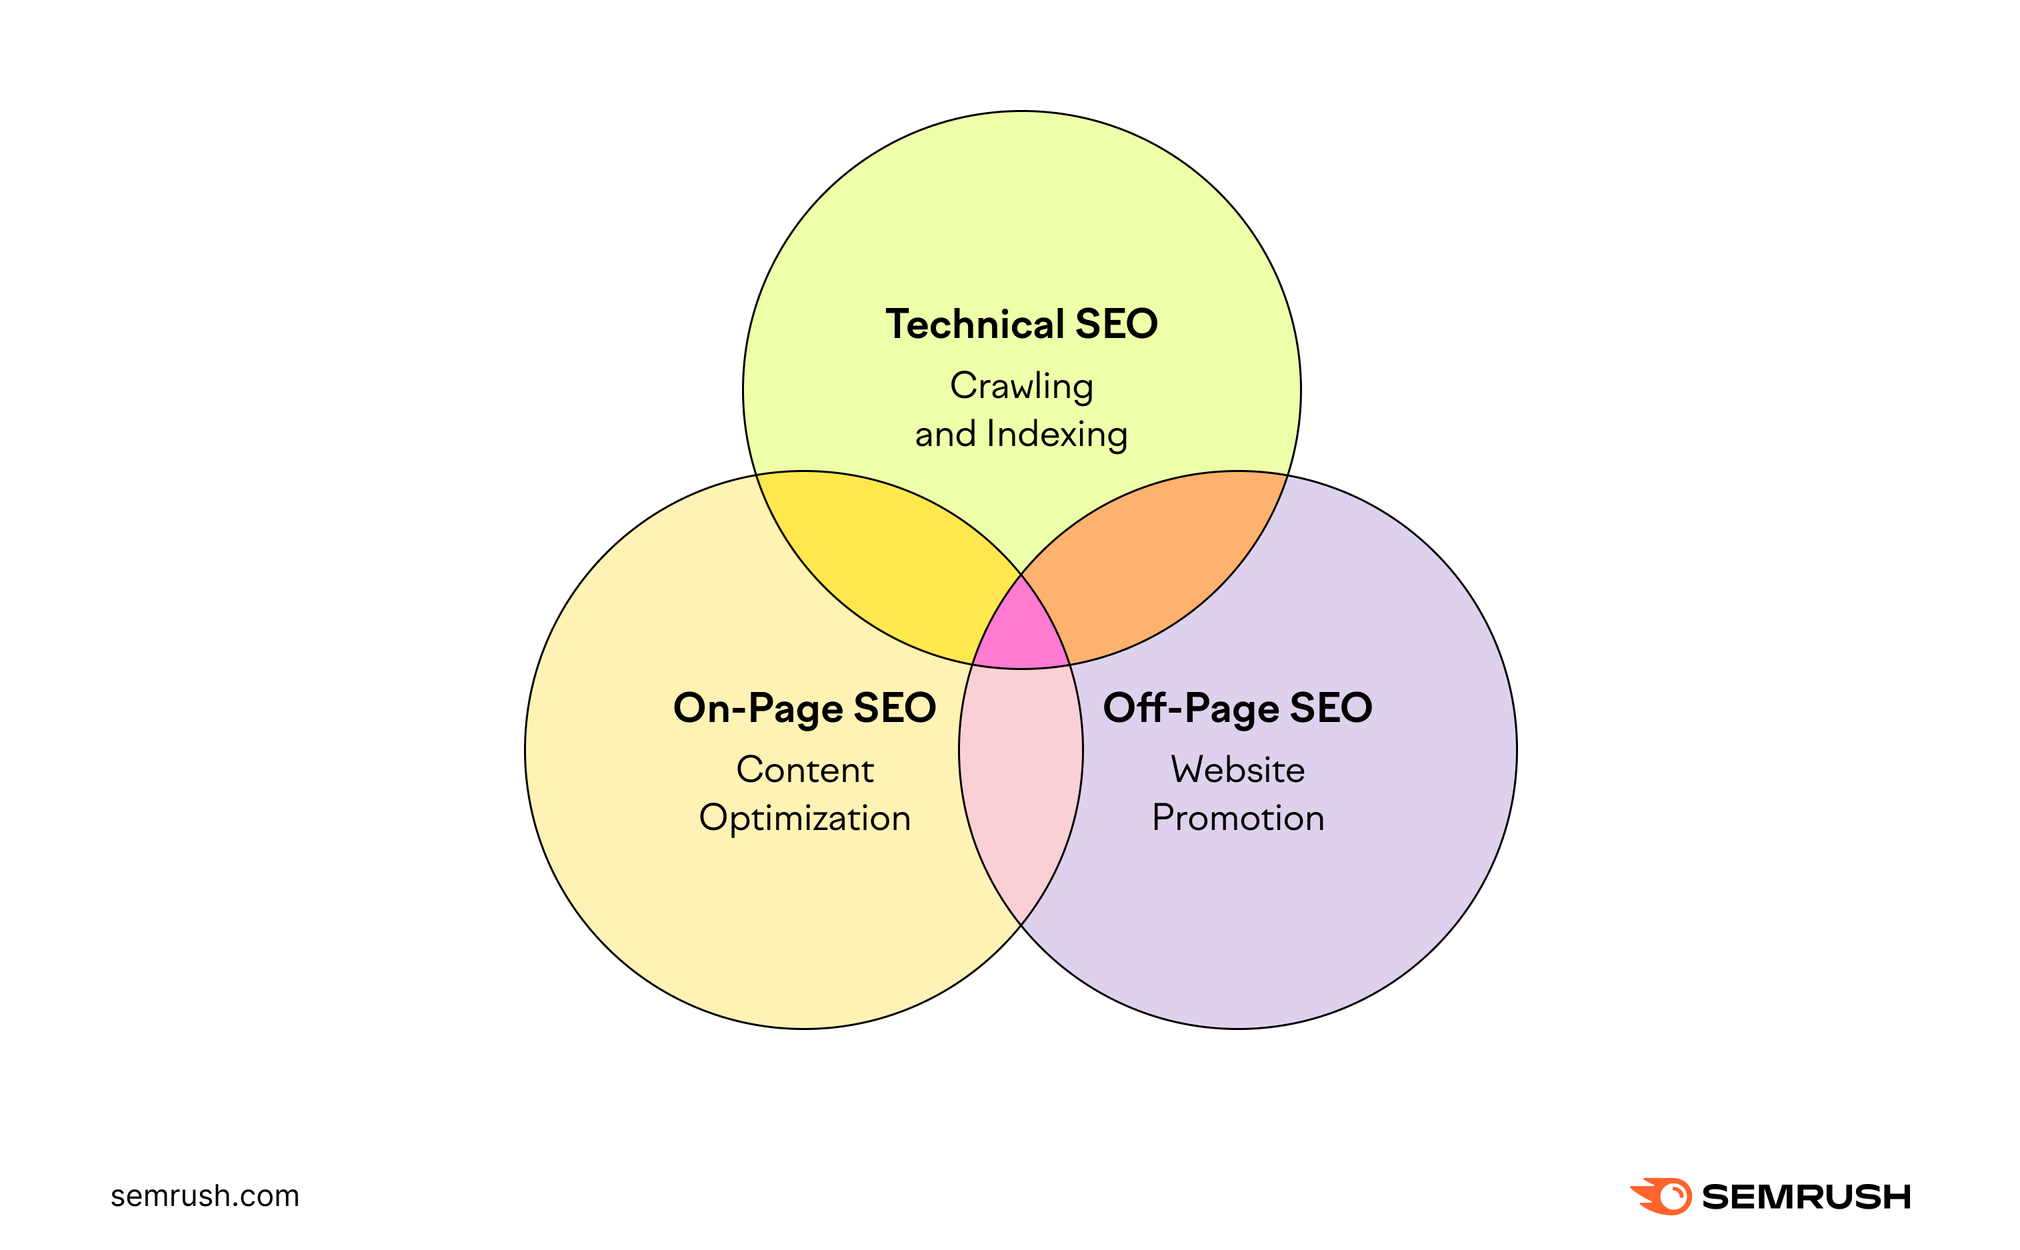 Three types of SEO: technical SEO, on-page SEO, and off-page SEO